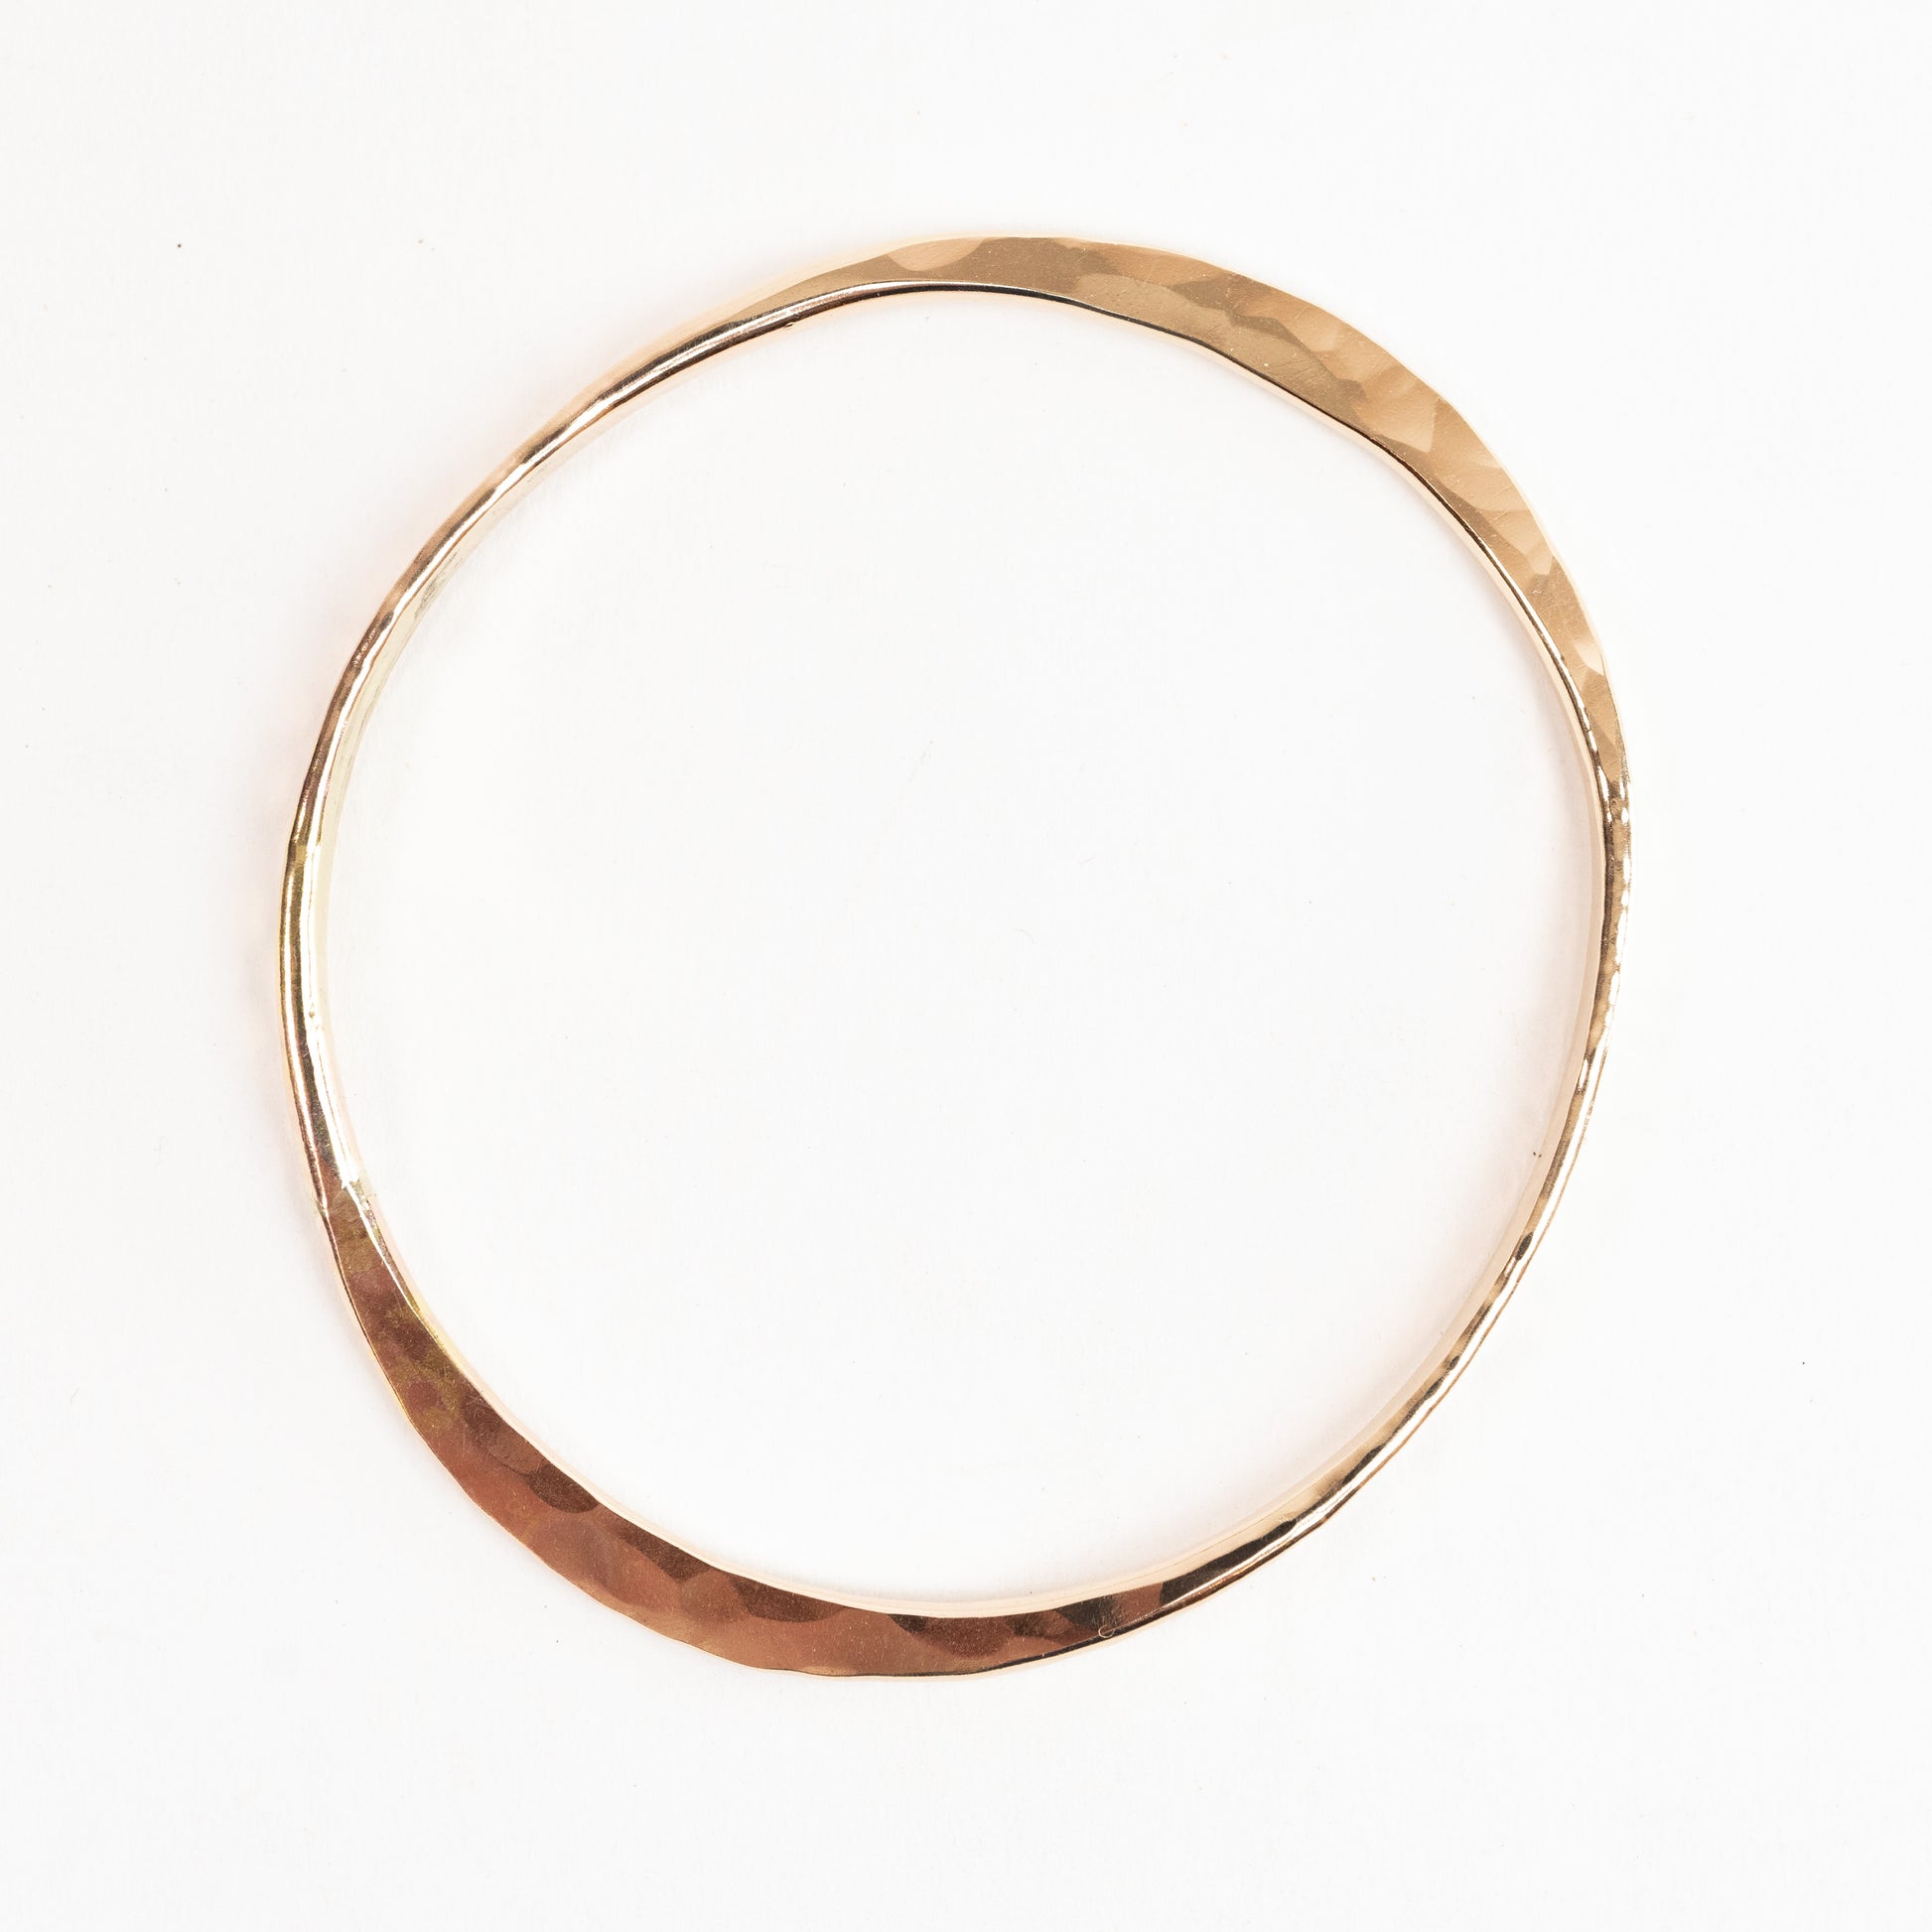 Bangle Bracelet - Gold fill - hand forged into an Oval - Heavy 8 gauge